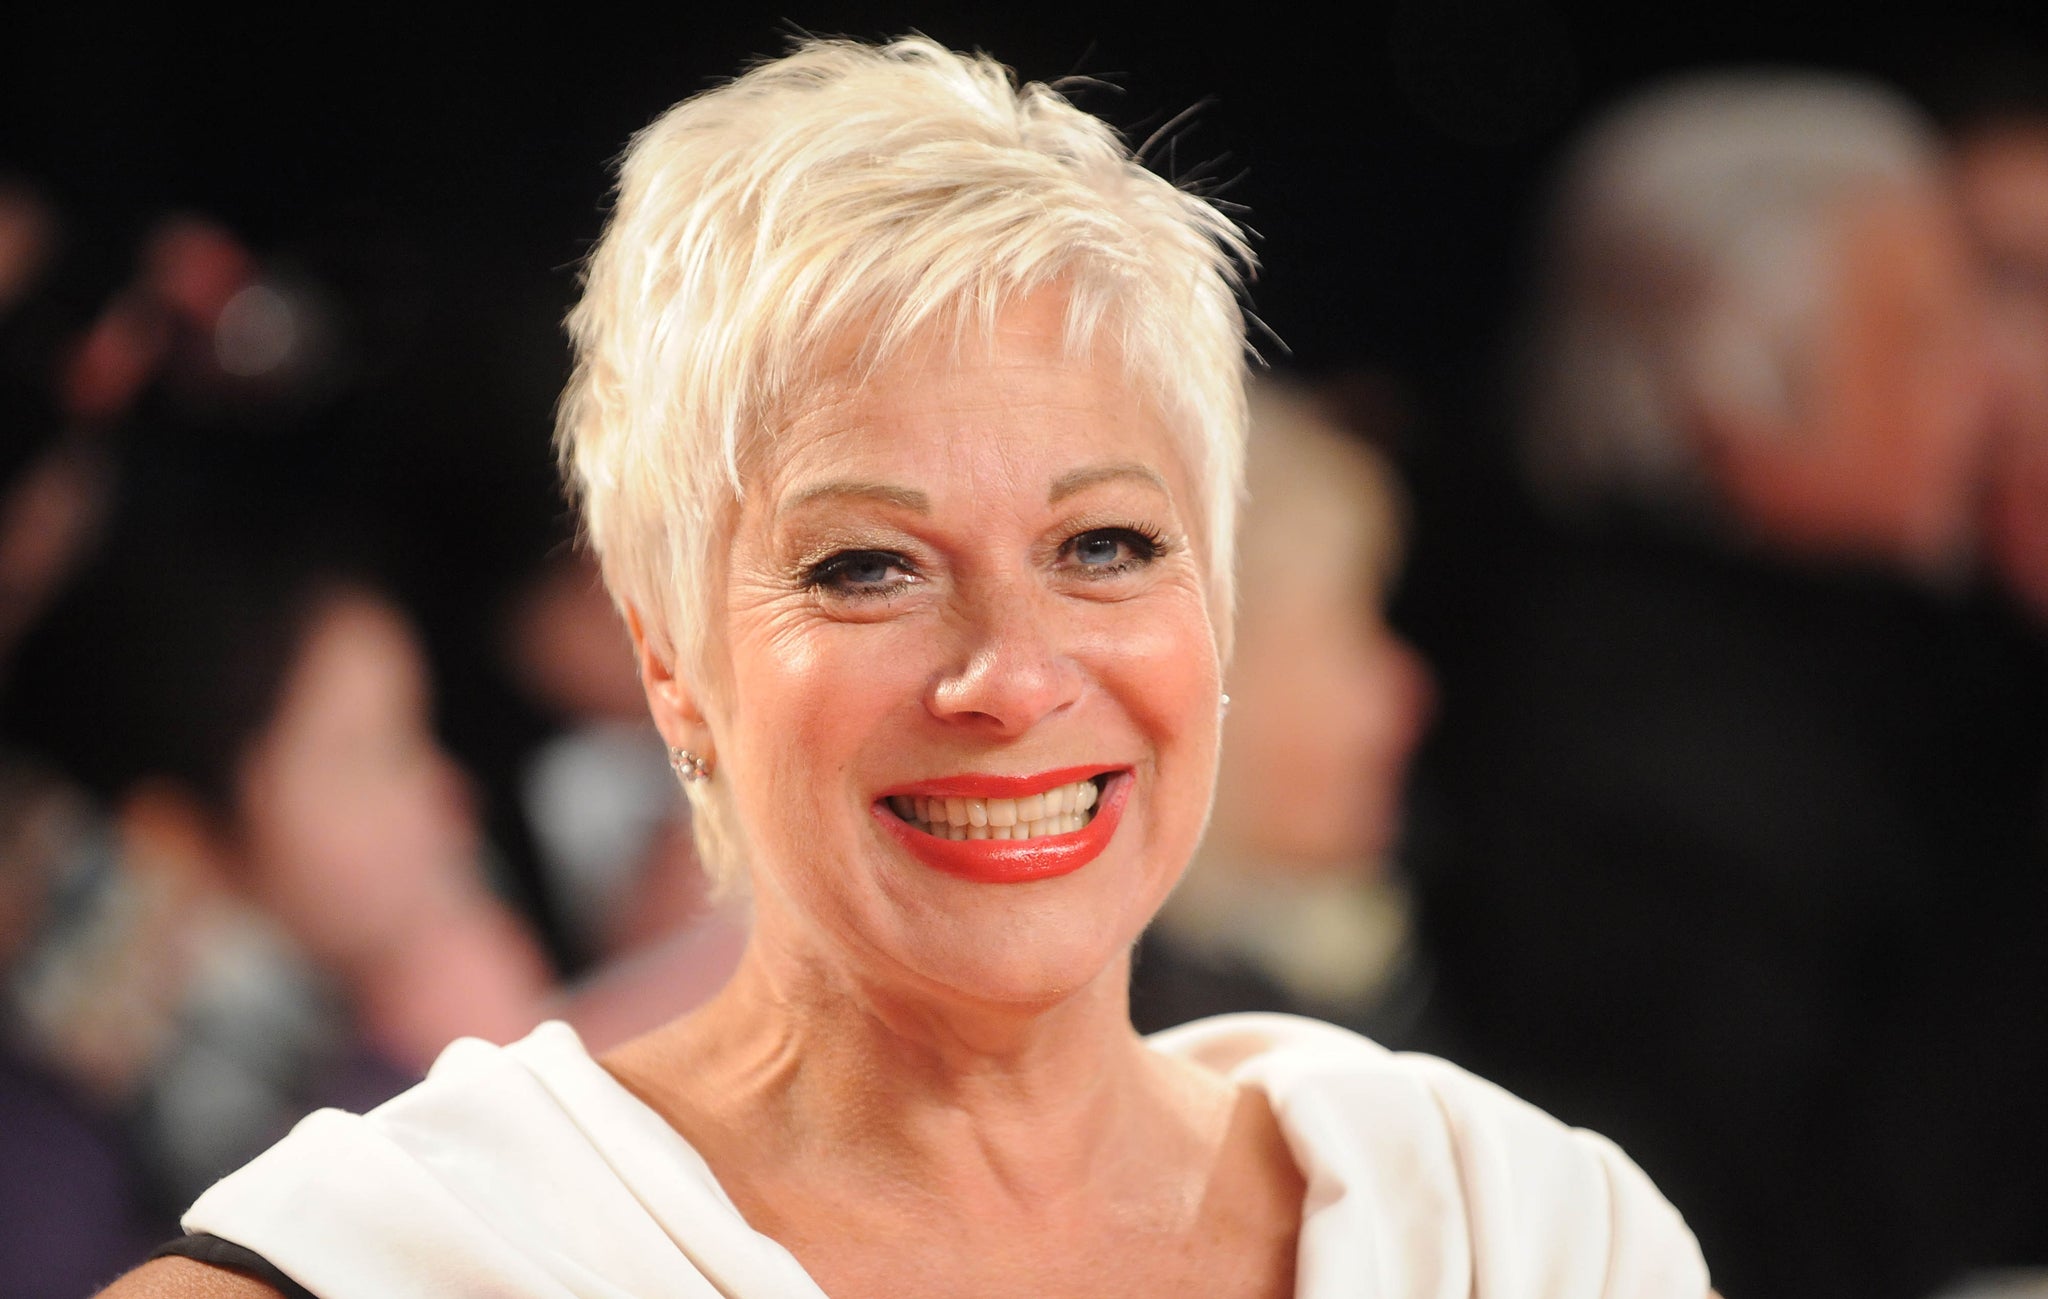 Denise Welch has criticised the media for its reporting on coronavirus